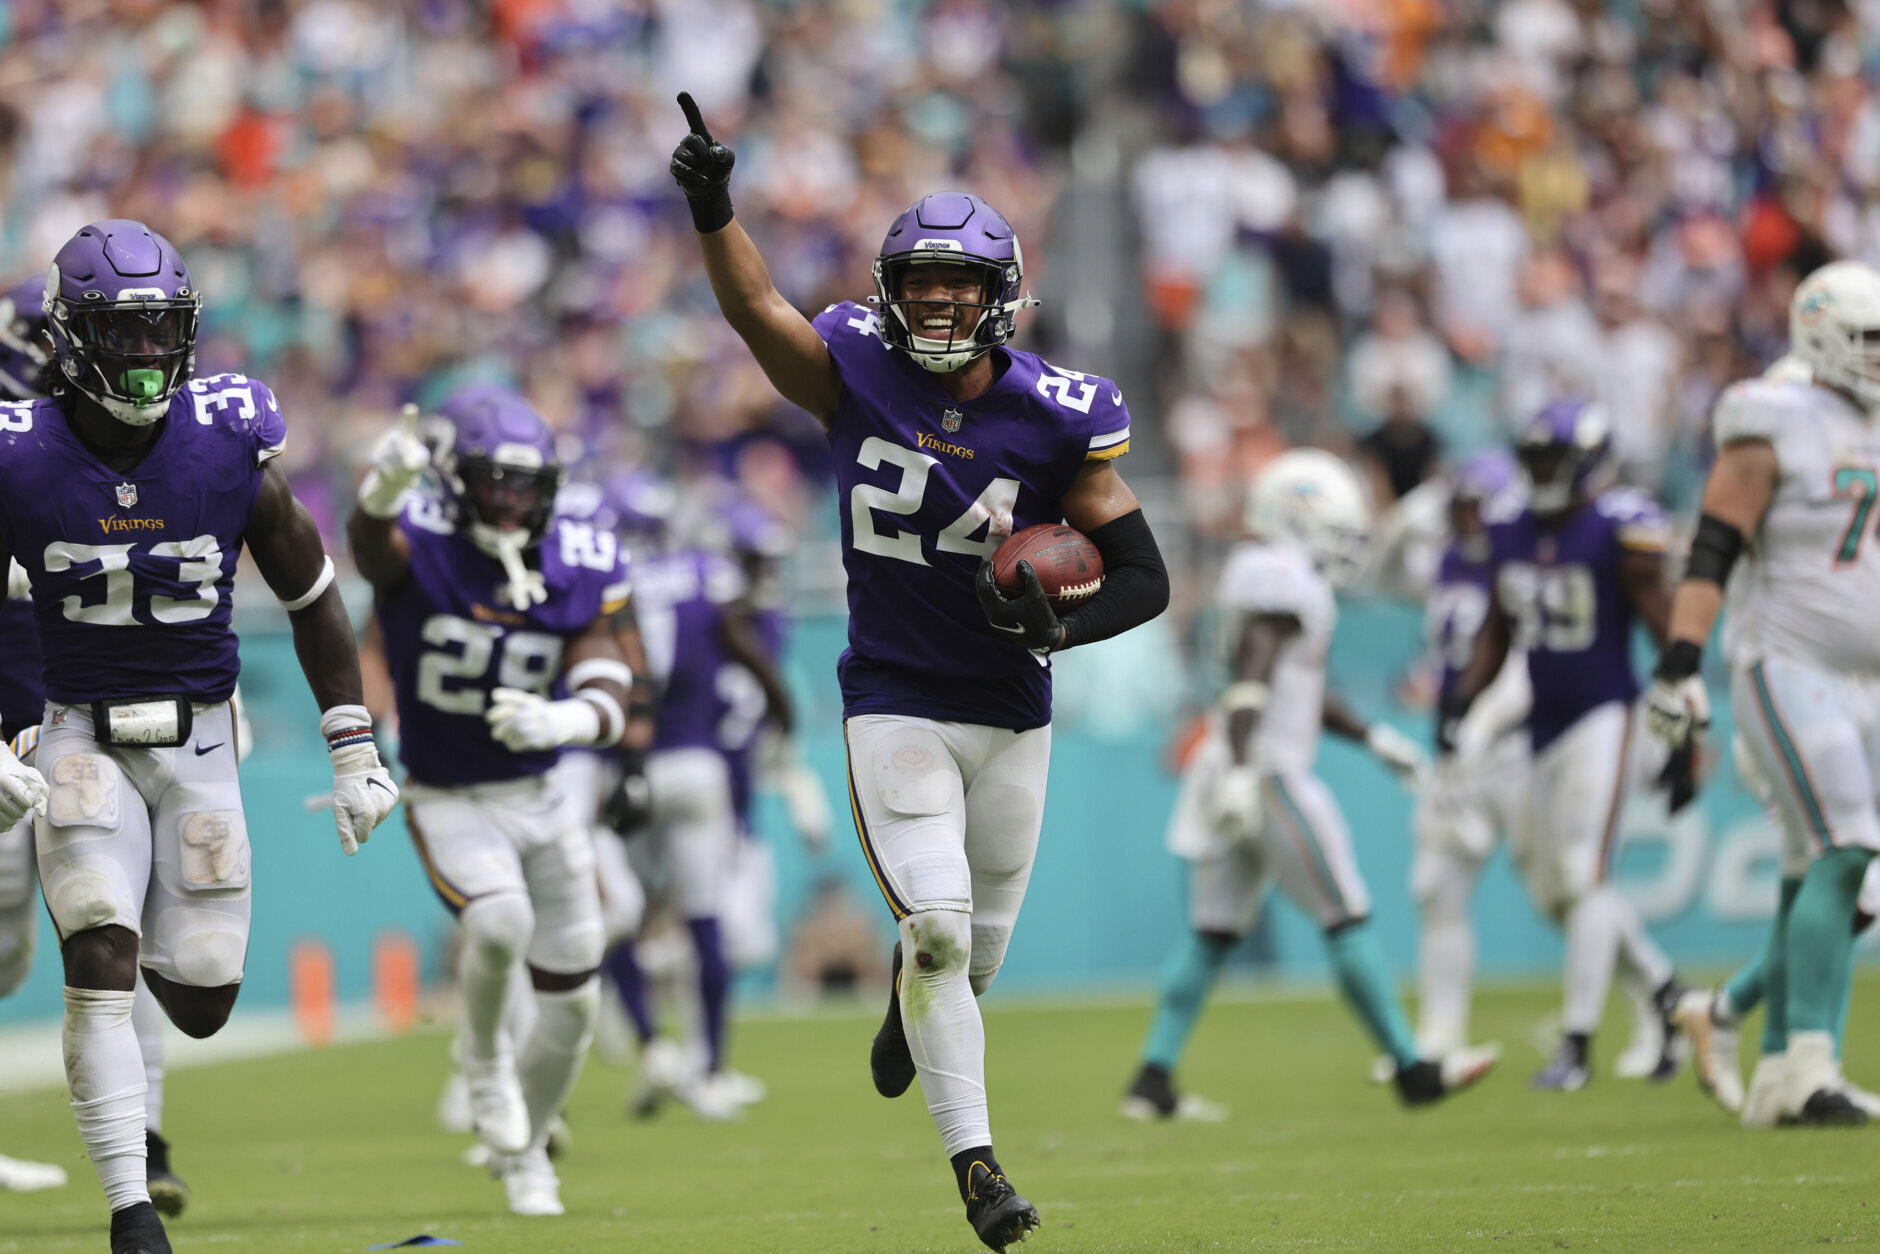 <p><em><strong>Vikings 24</strong></em><br />
<em><strong>Dolphins 16</strong></em></p>
<p>Props to Minnesota for <a href="https://twitter.com/ProFootballTalk/status/1581700656465051648?s=20&amp;t=mkhusKefZZHUuPJxv8-JhQ" target="_blank" rel="noopener">beating the heat</a> and starting 5-1 — but this has to be the softest 5-1 start I&#8217;ve ever seen. The Vikings&#8217; schedule sets them up to win the NFC North, and maybe even have a gaudy record, but I can&#8217;t take this team seriously unless and until they can beat the likes of the Bills and Cowboys in November.</p>
